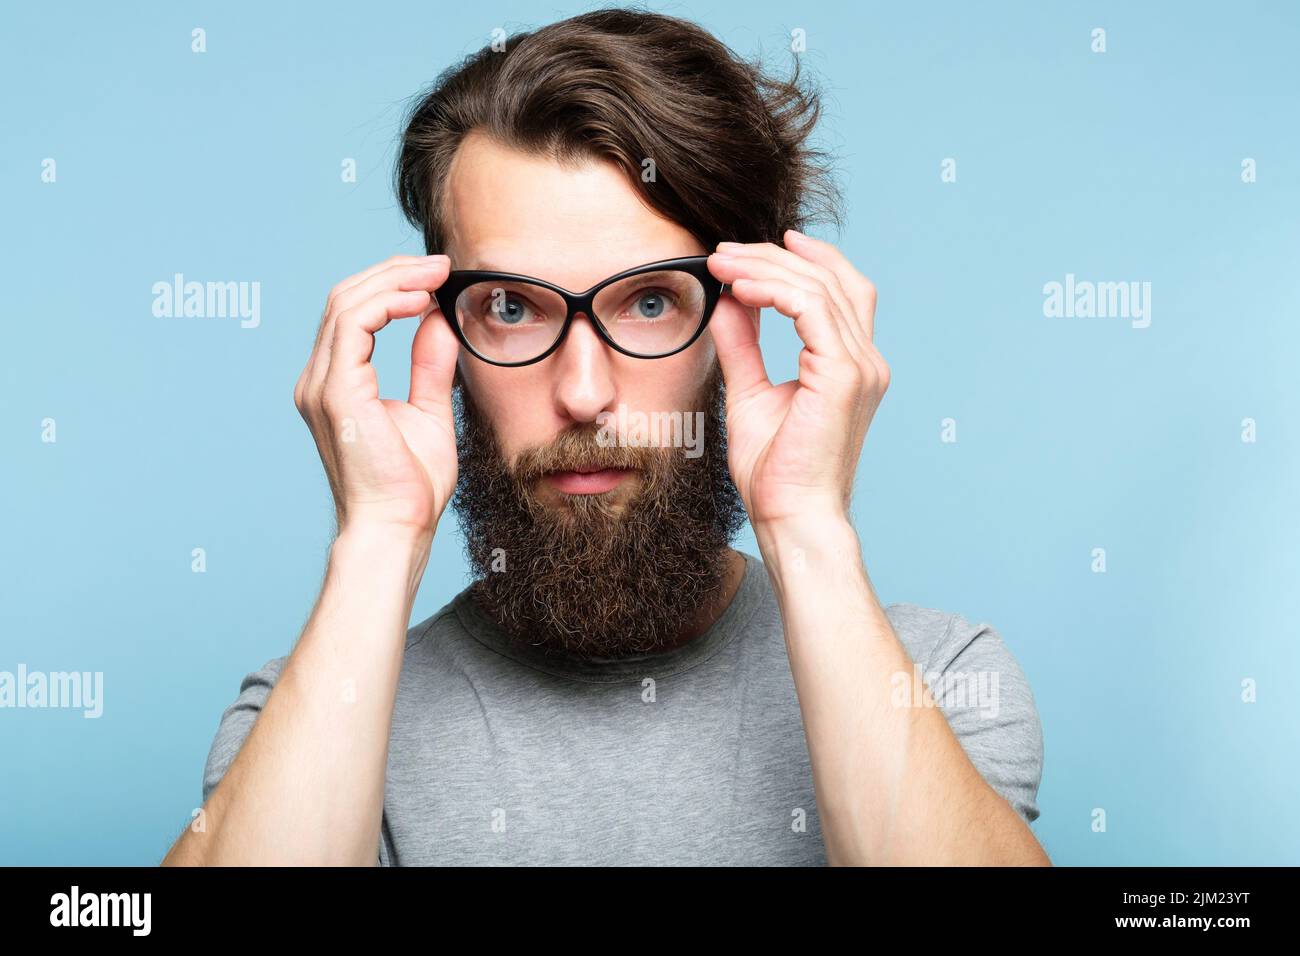 bearded hipster fixing cat eye glasses geeky man Stock Photo